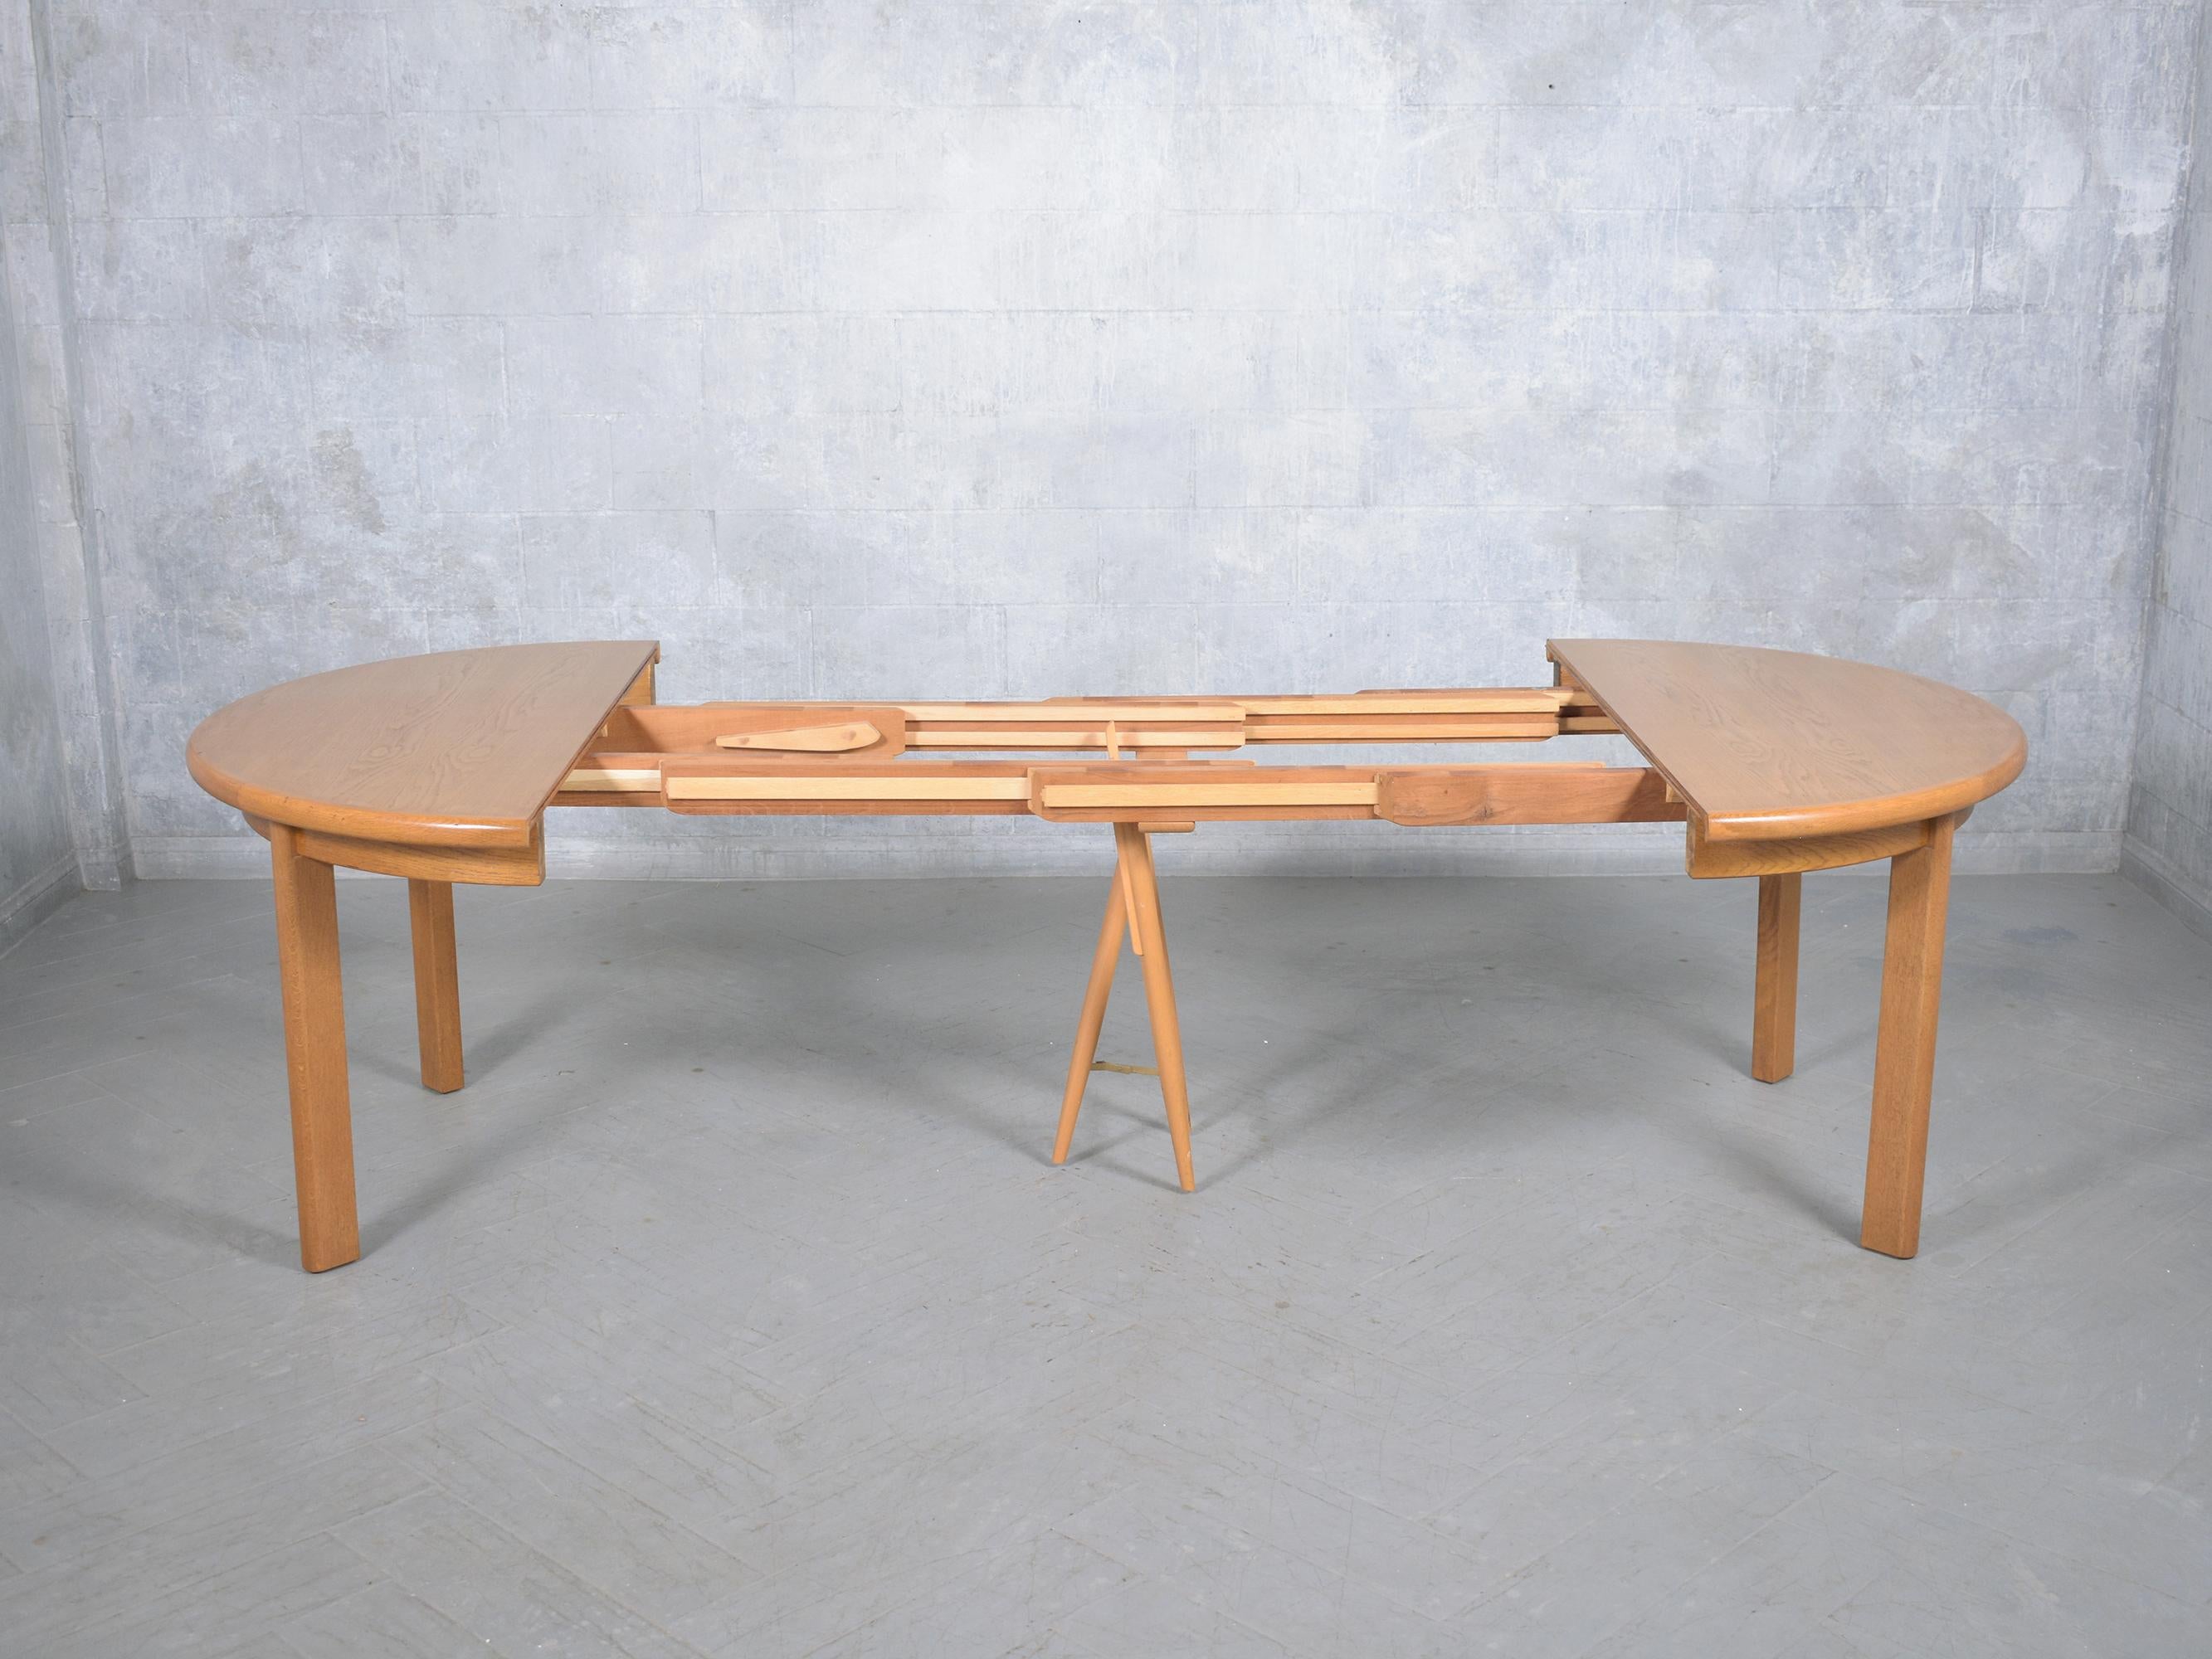 1970s Danish Modern Teak Dining Table with Extendable Leaves For Sale 2